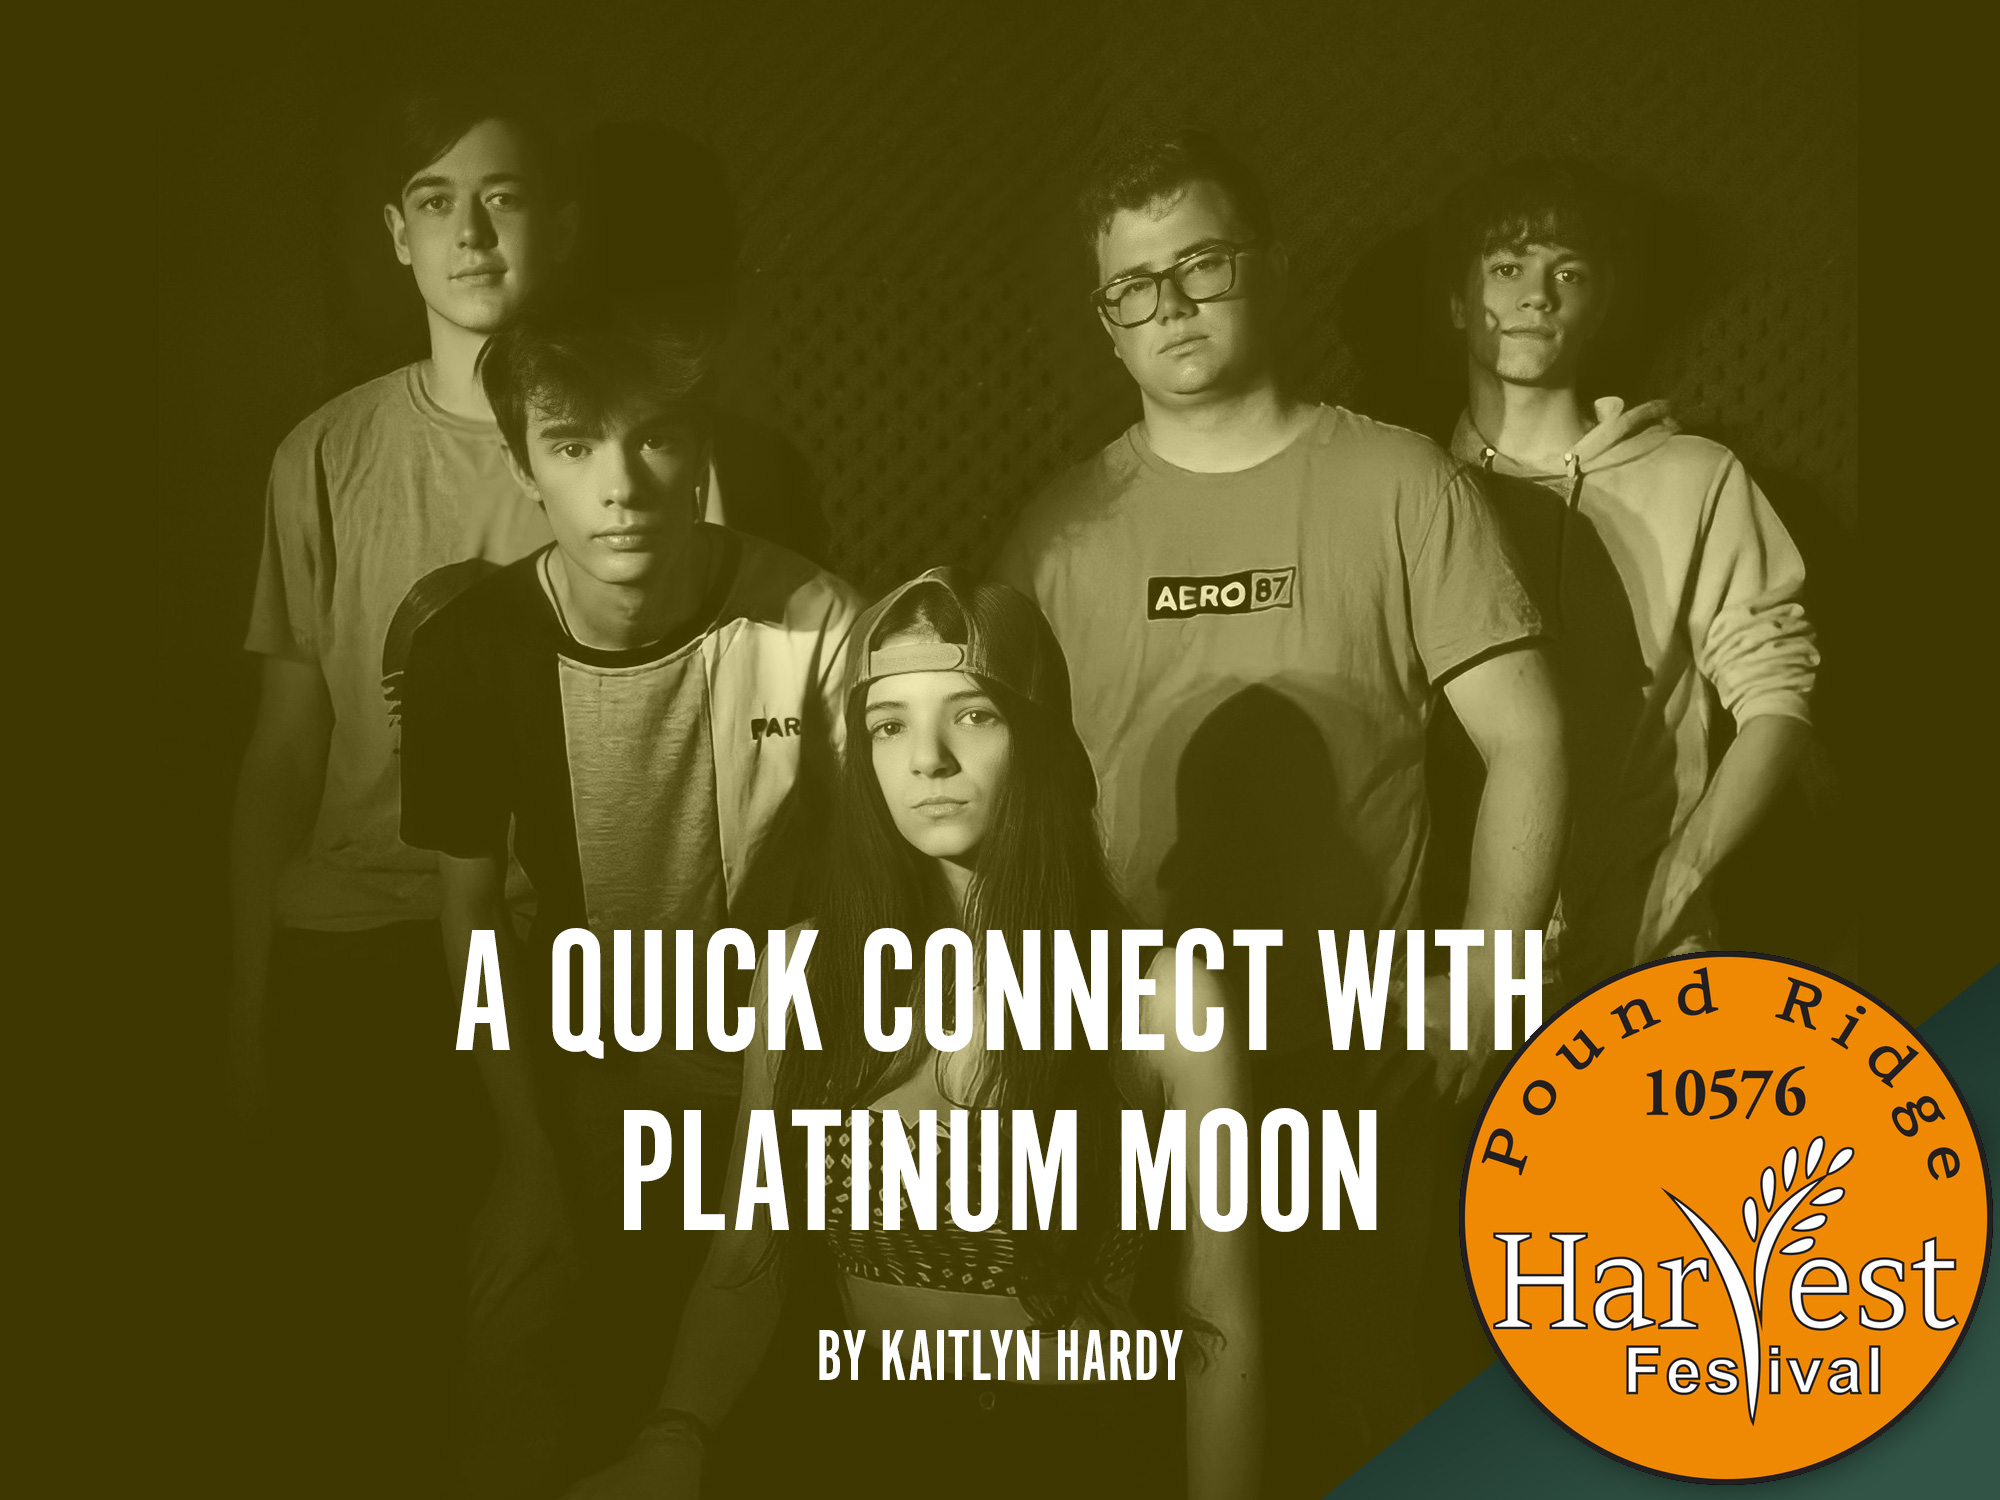 A Quick Connect with Platinum Moon